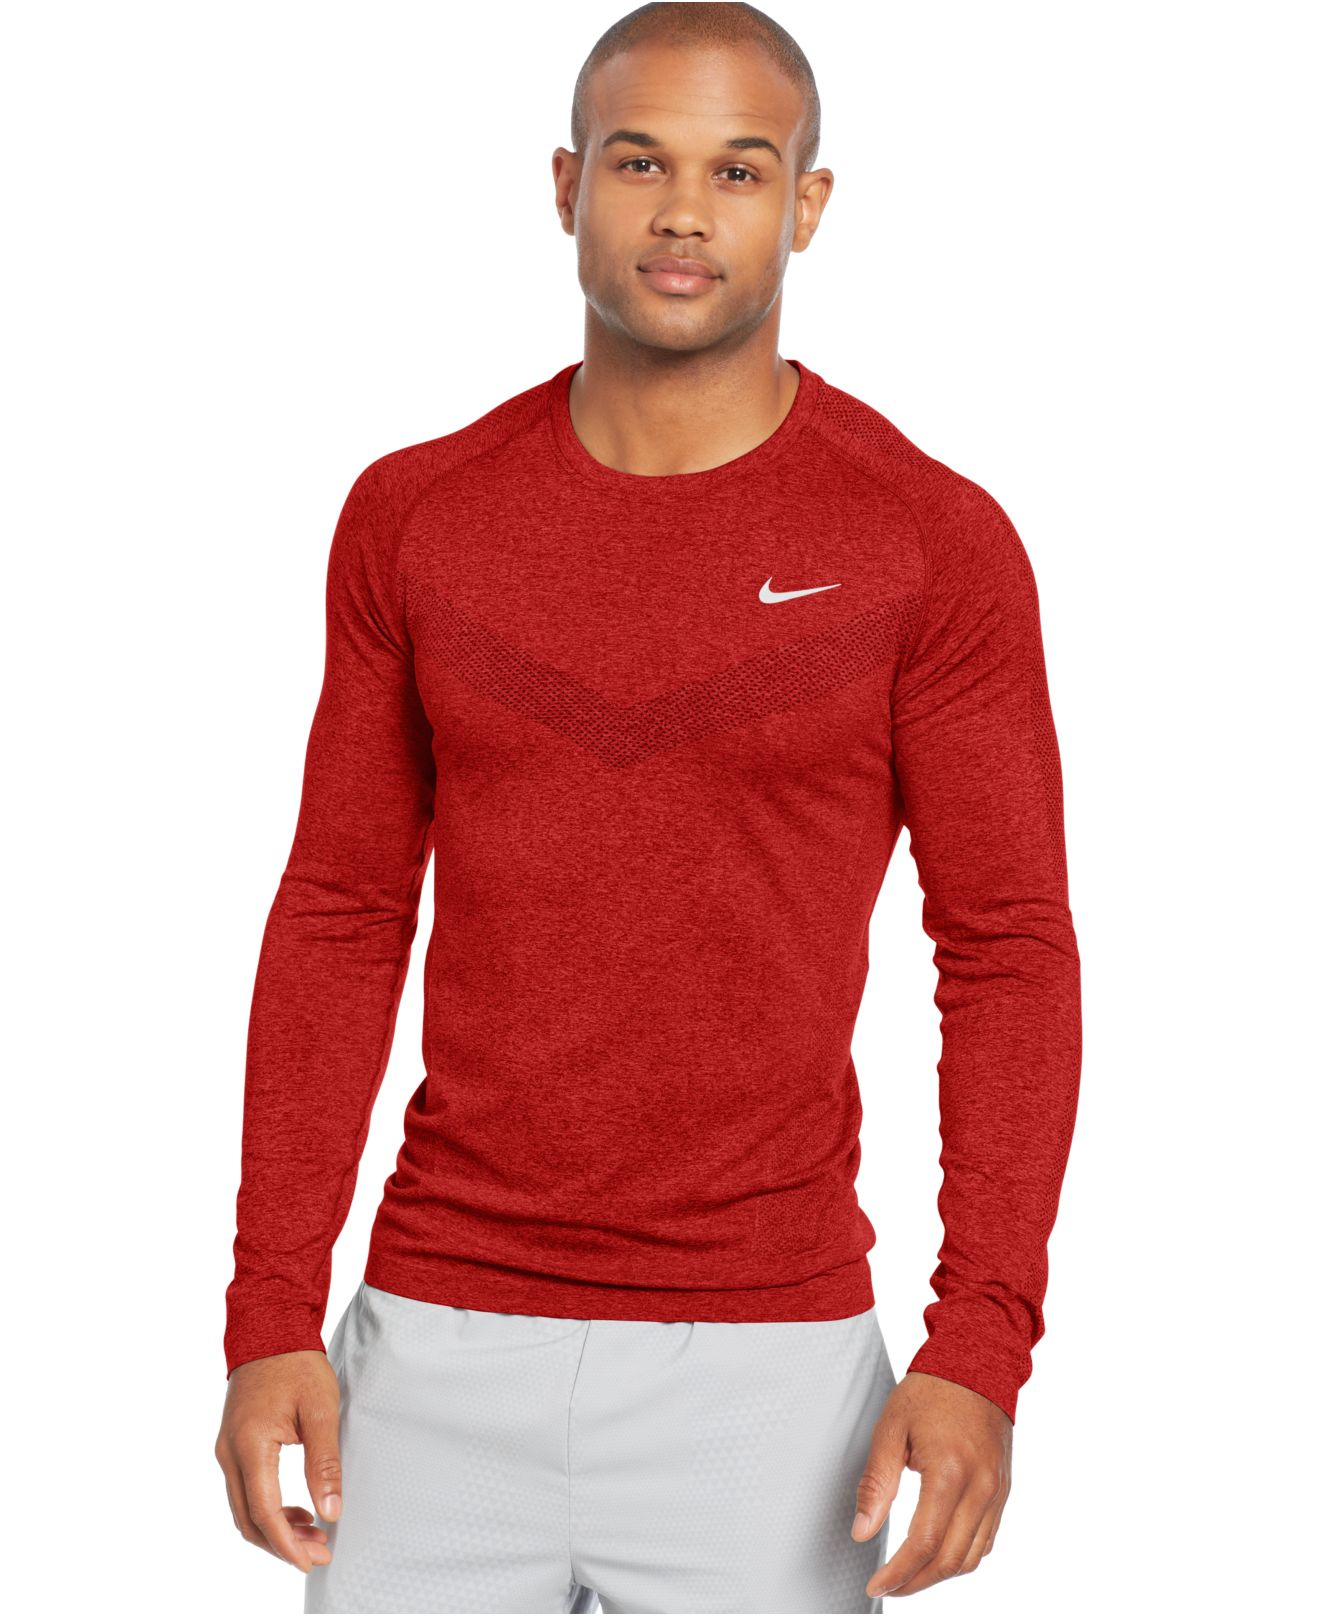 Nike Long-Sleeve Dri-Fit Performance T-Shirt in Red for Men - Lyst